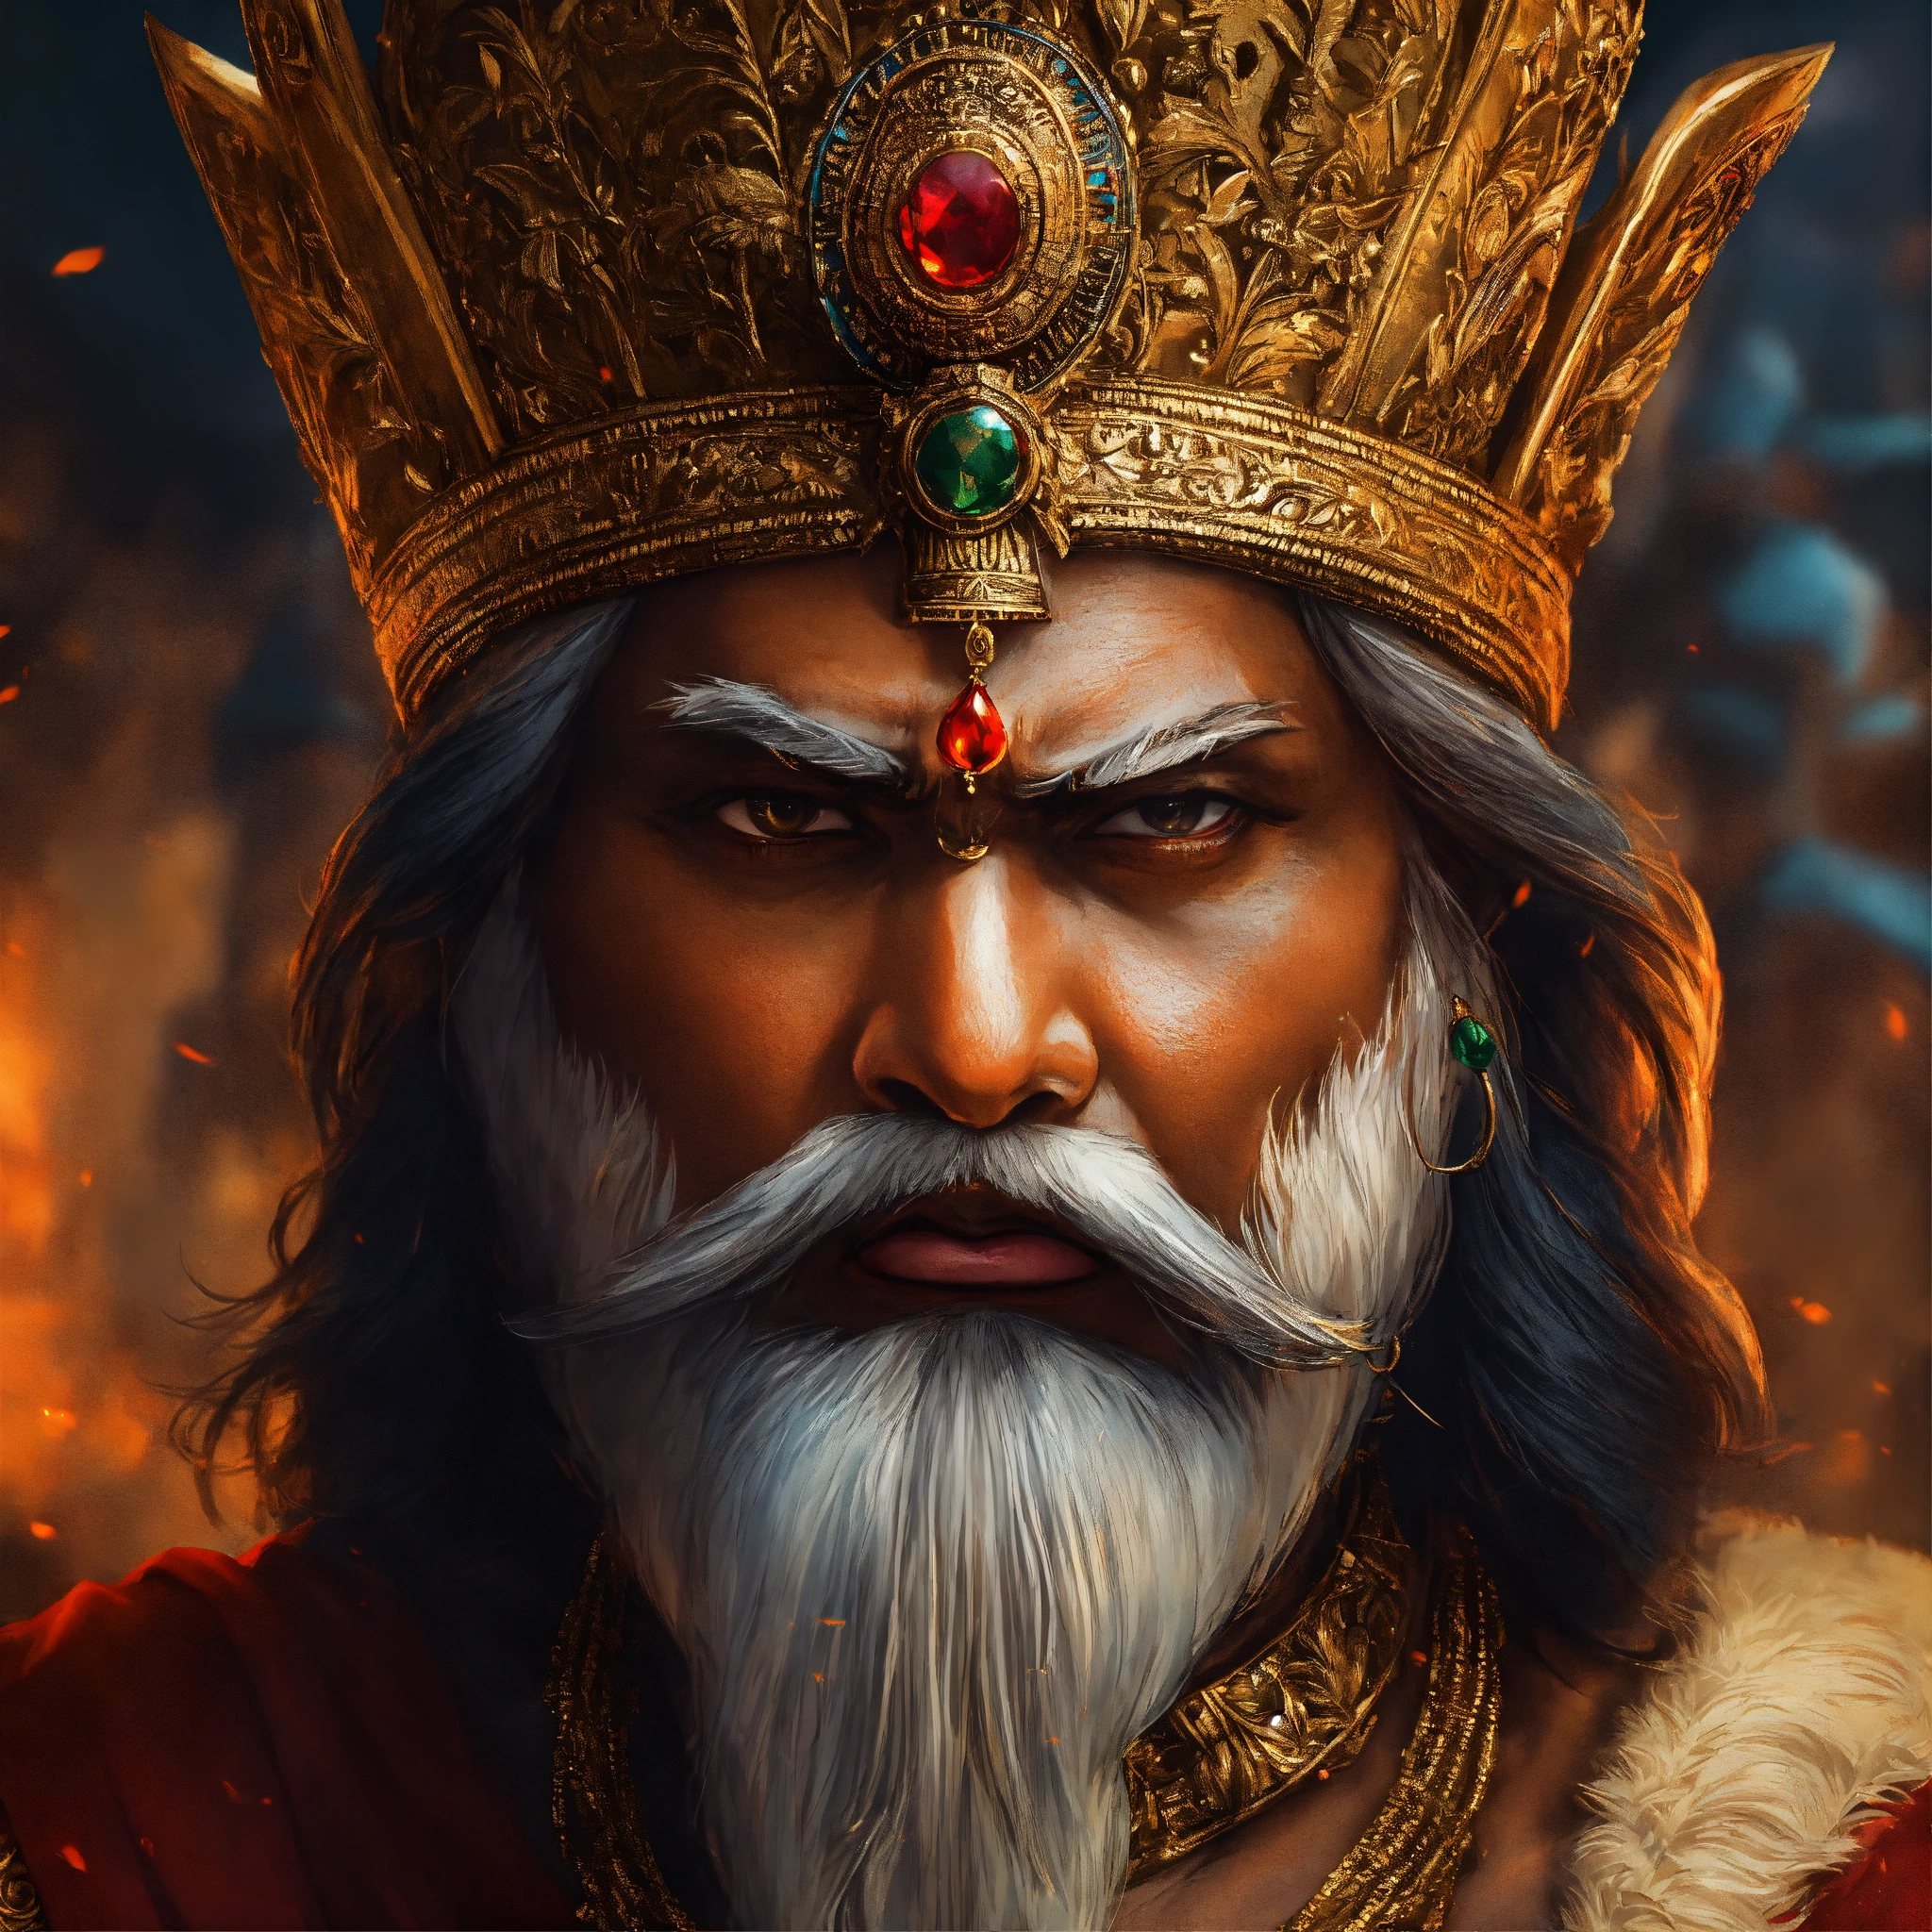 Lexica - Indian king akhira angry face